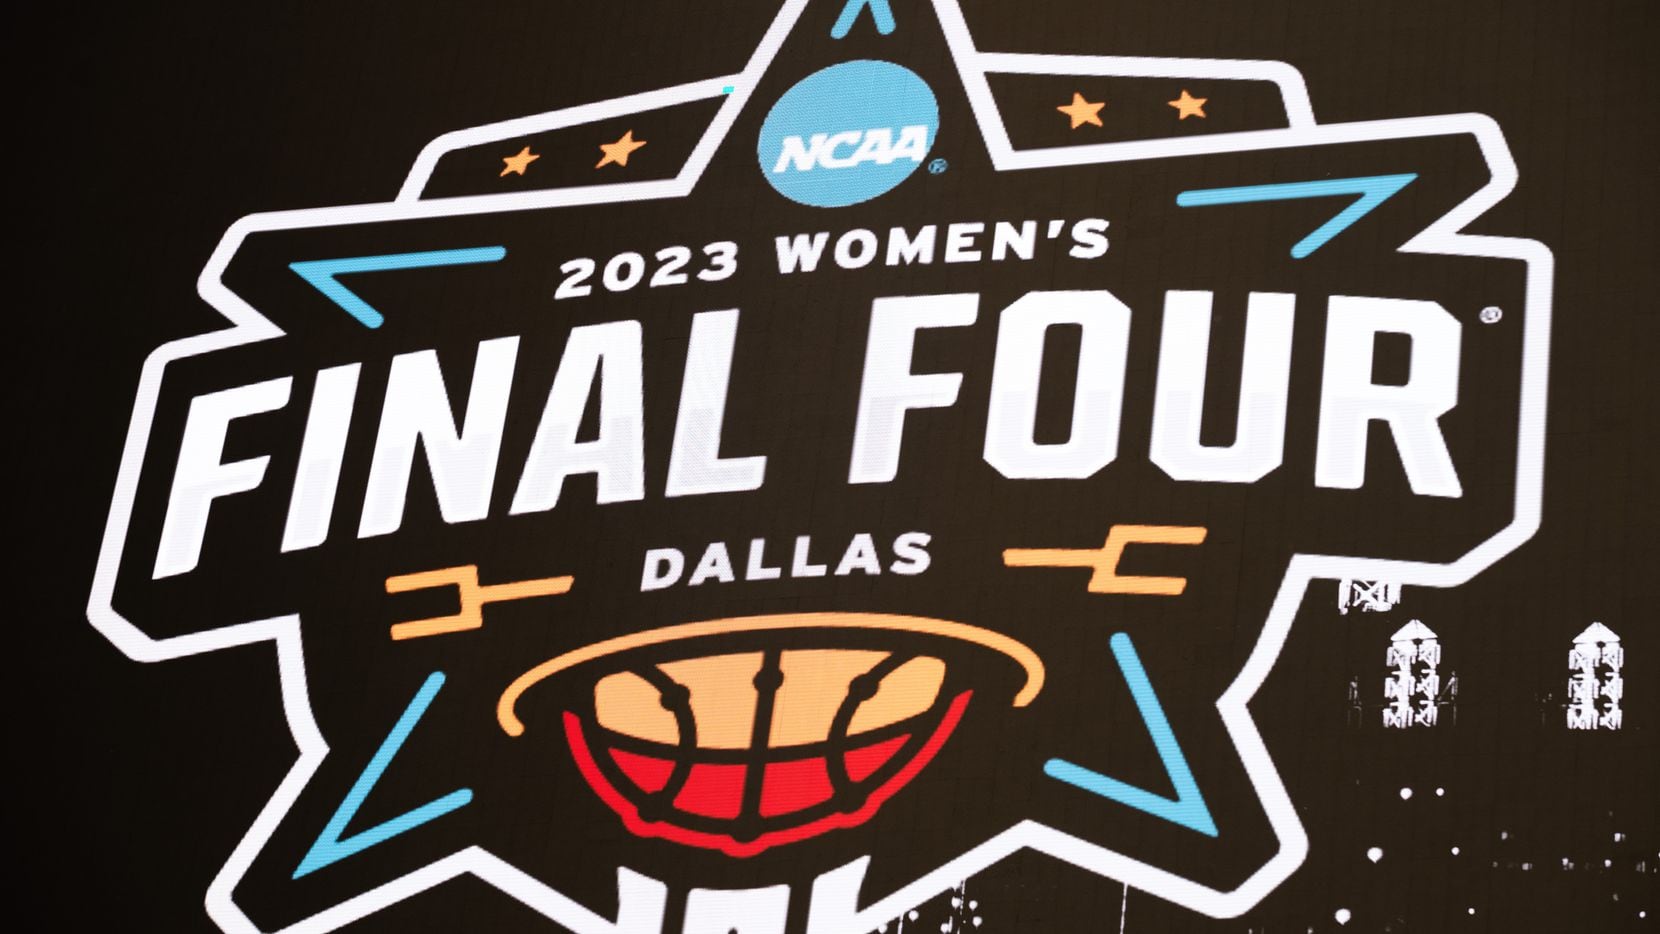 Photos There it is! The NCAA reveals the logo for the 2023 women's